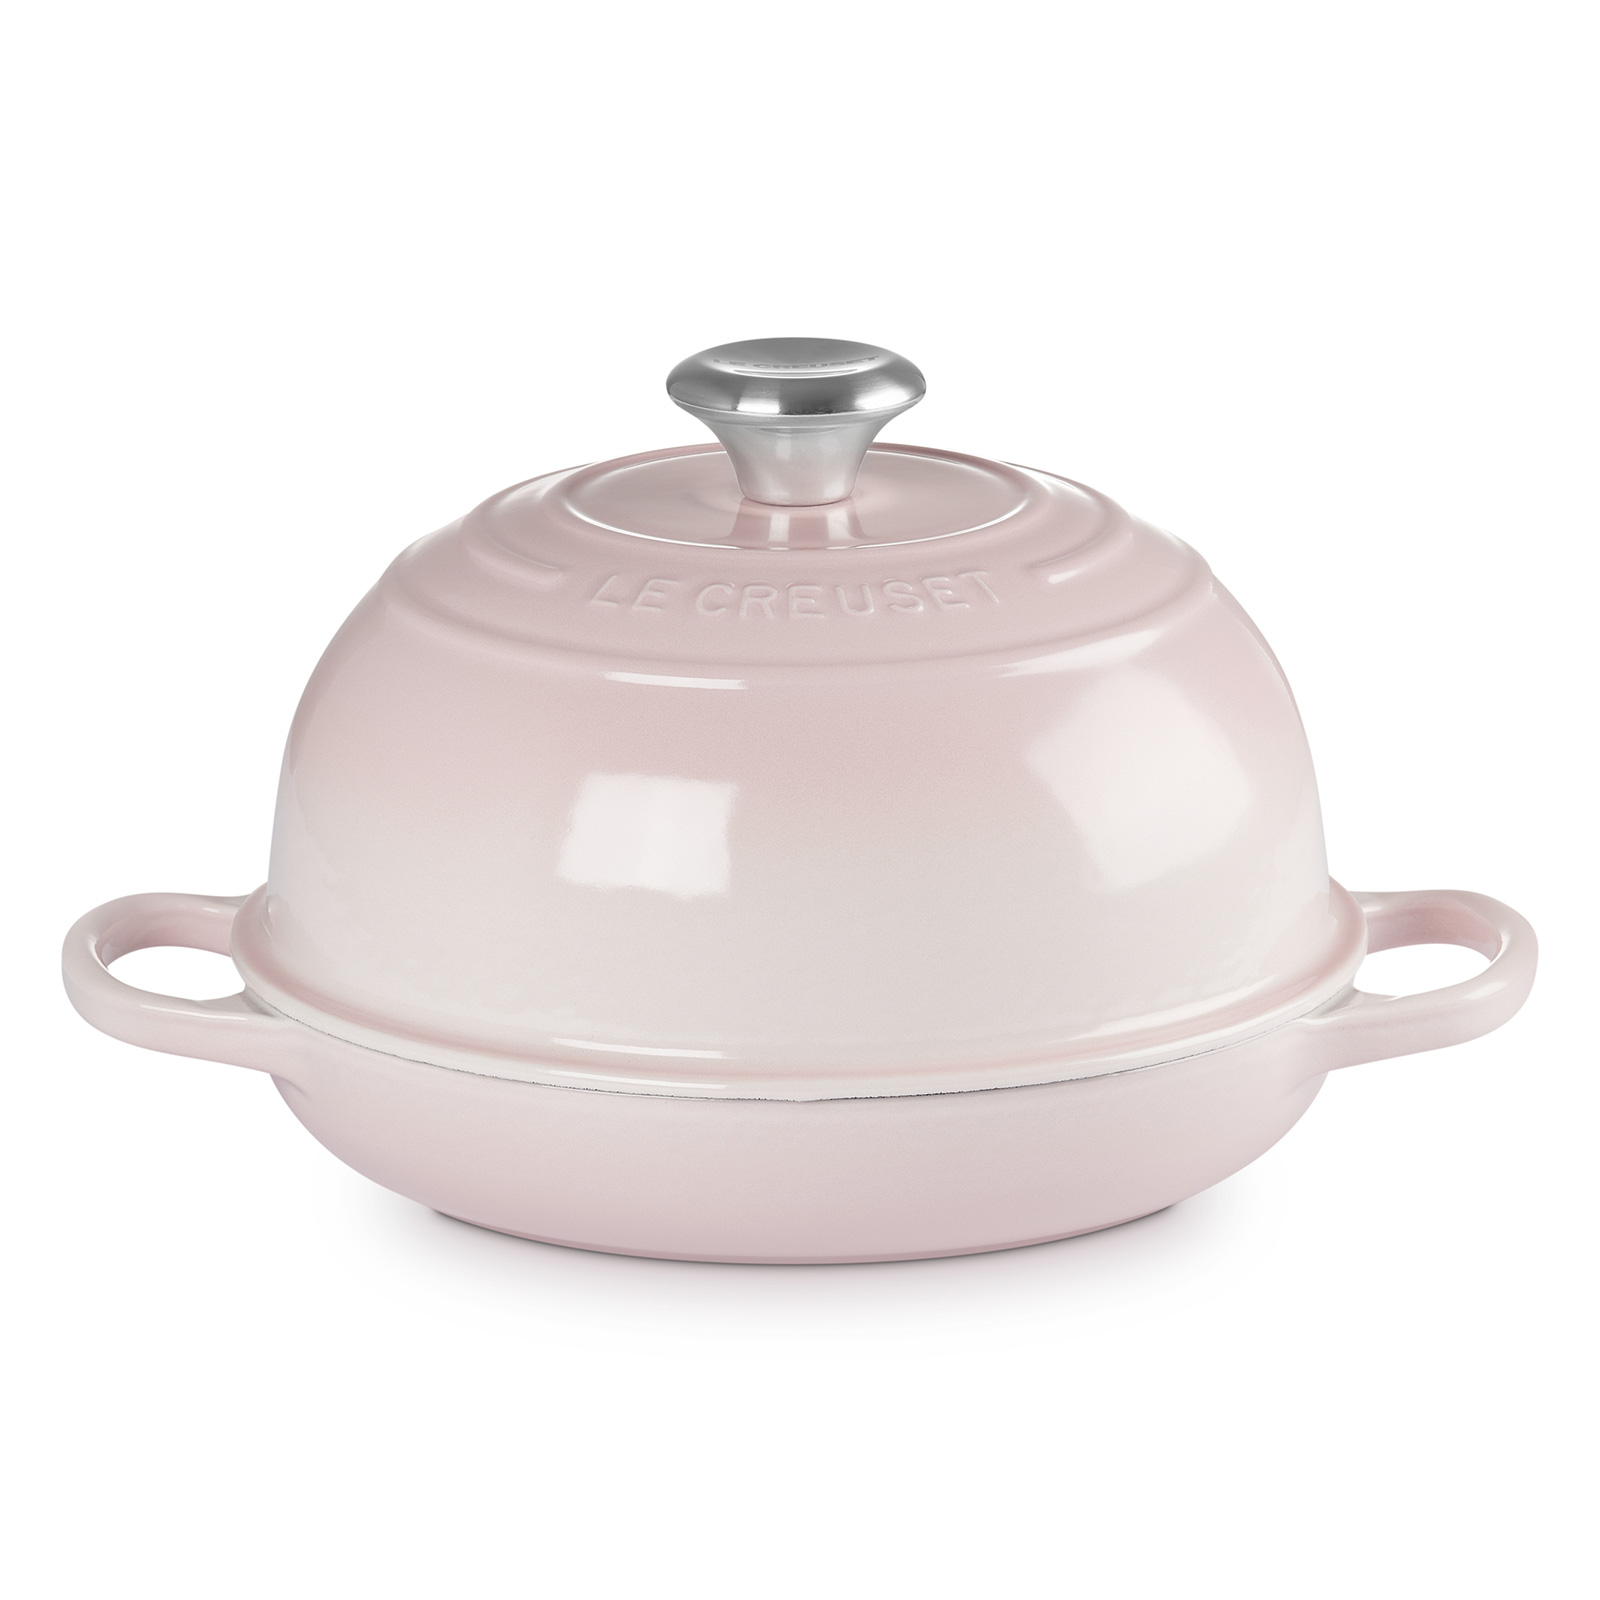 Signature Bread Oven 24cm Shell Pink